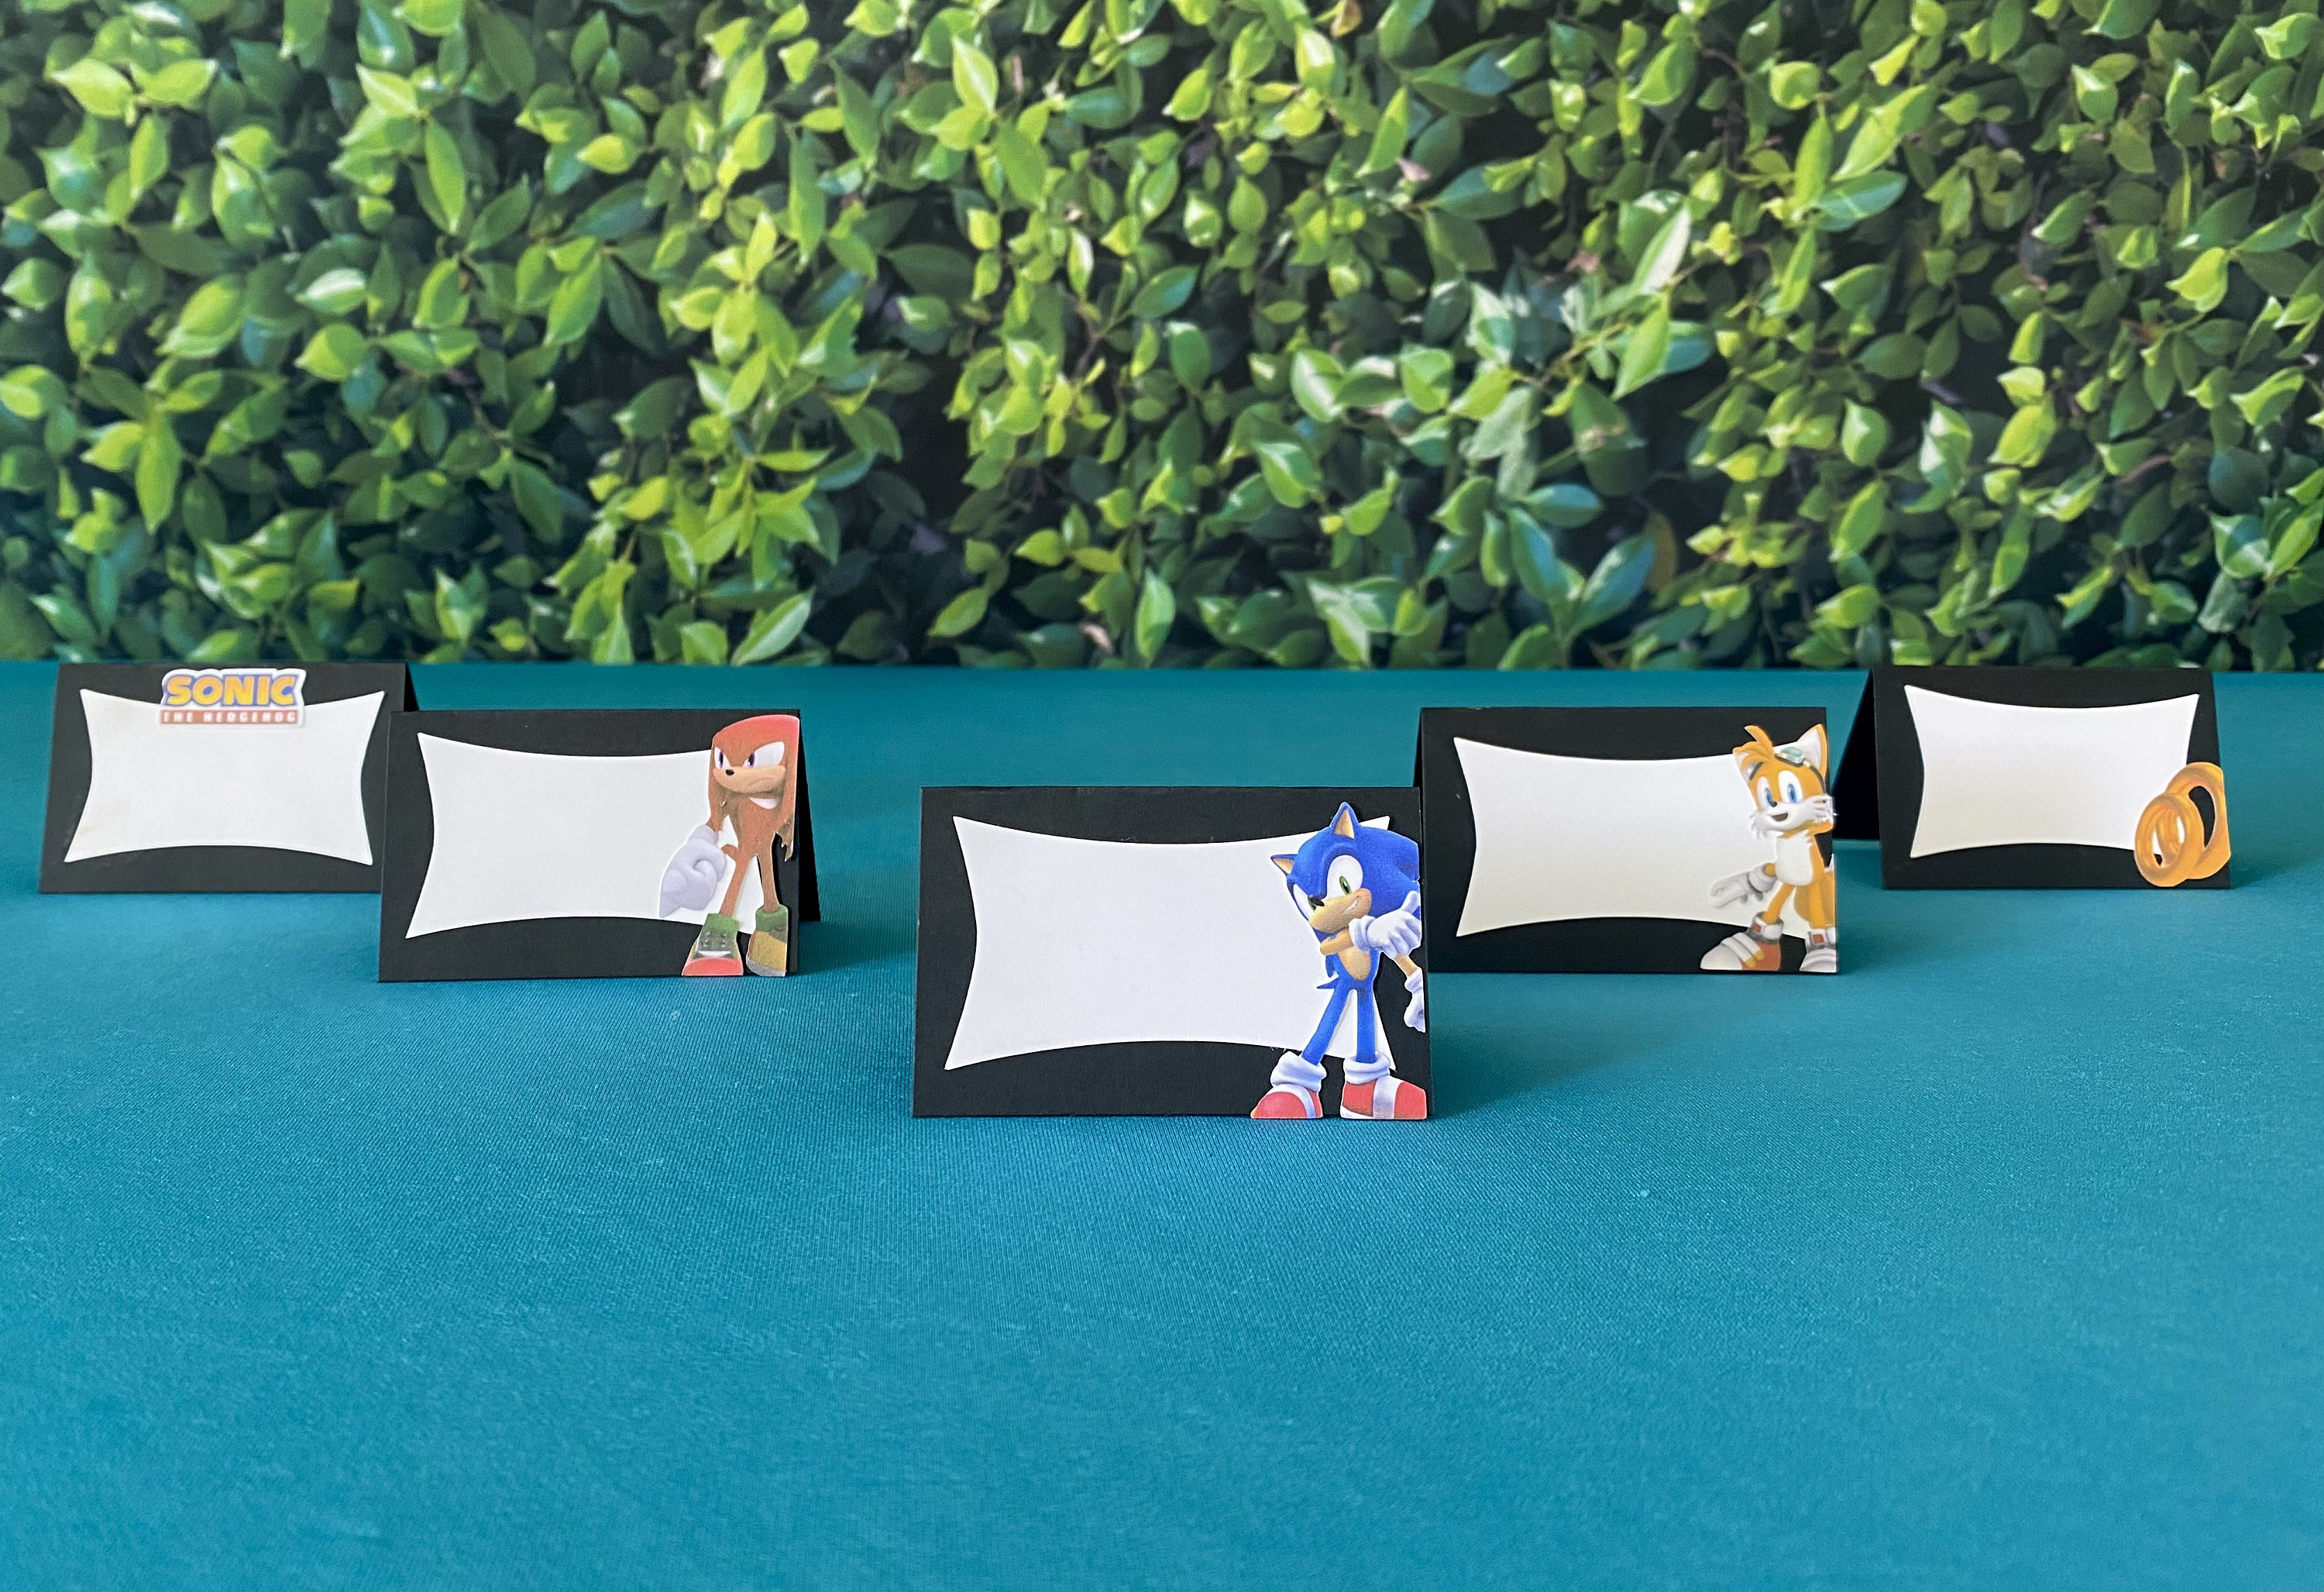 Sonic Centerpieces, Sonic Party Supplies, Sonic Party Favors